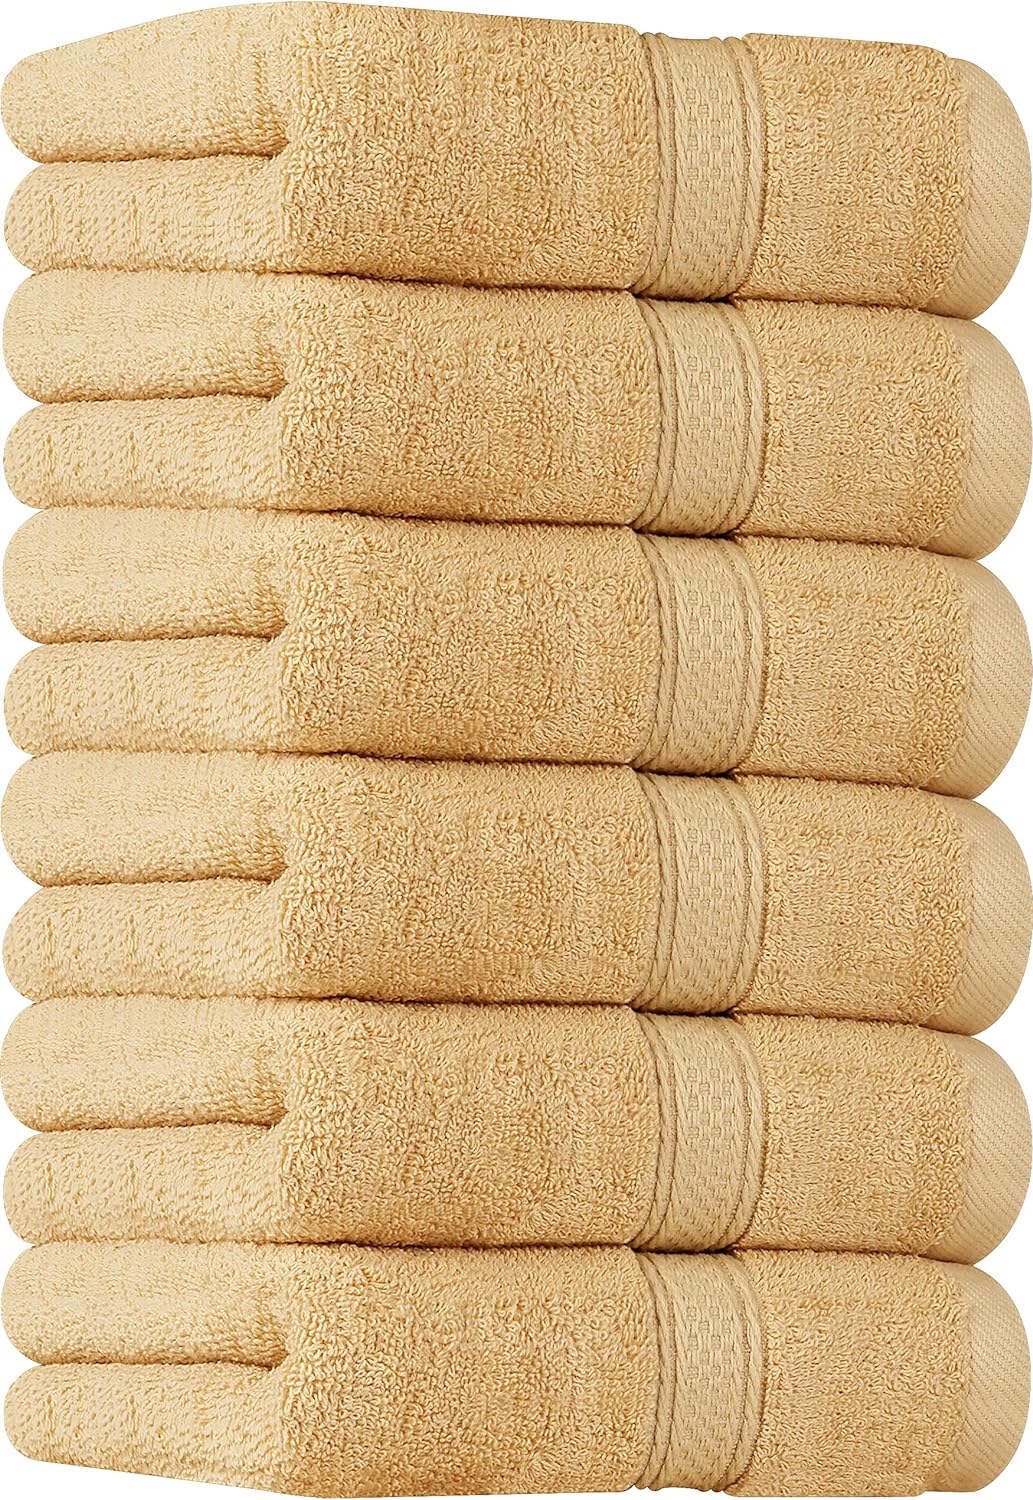 Utopia Towels [12 Pack Premium Wash Cloths Set (12 x 12 Inches) 100% Cotton Ring Spun, Highly Absorbent and Soft Feel Essential Washcloths for Bathroom, Spa, Gym, and Face Towel (Grey)